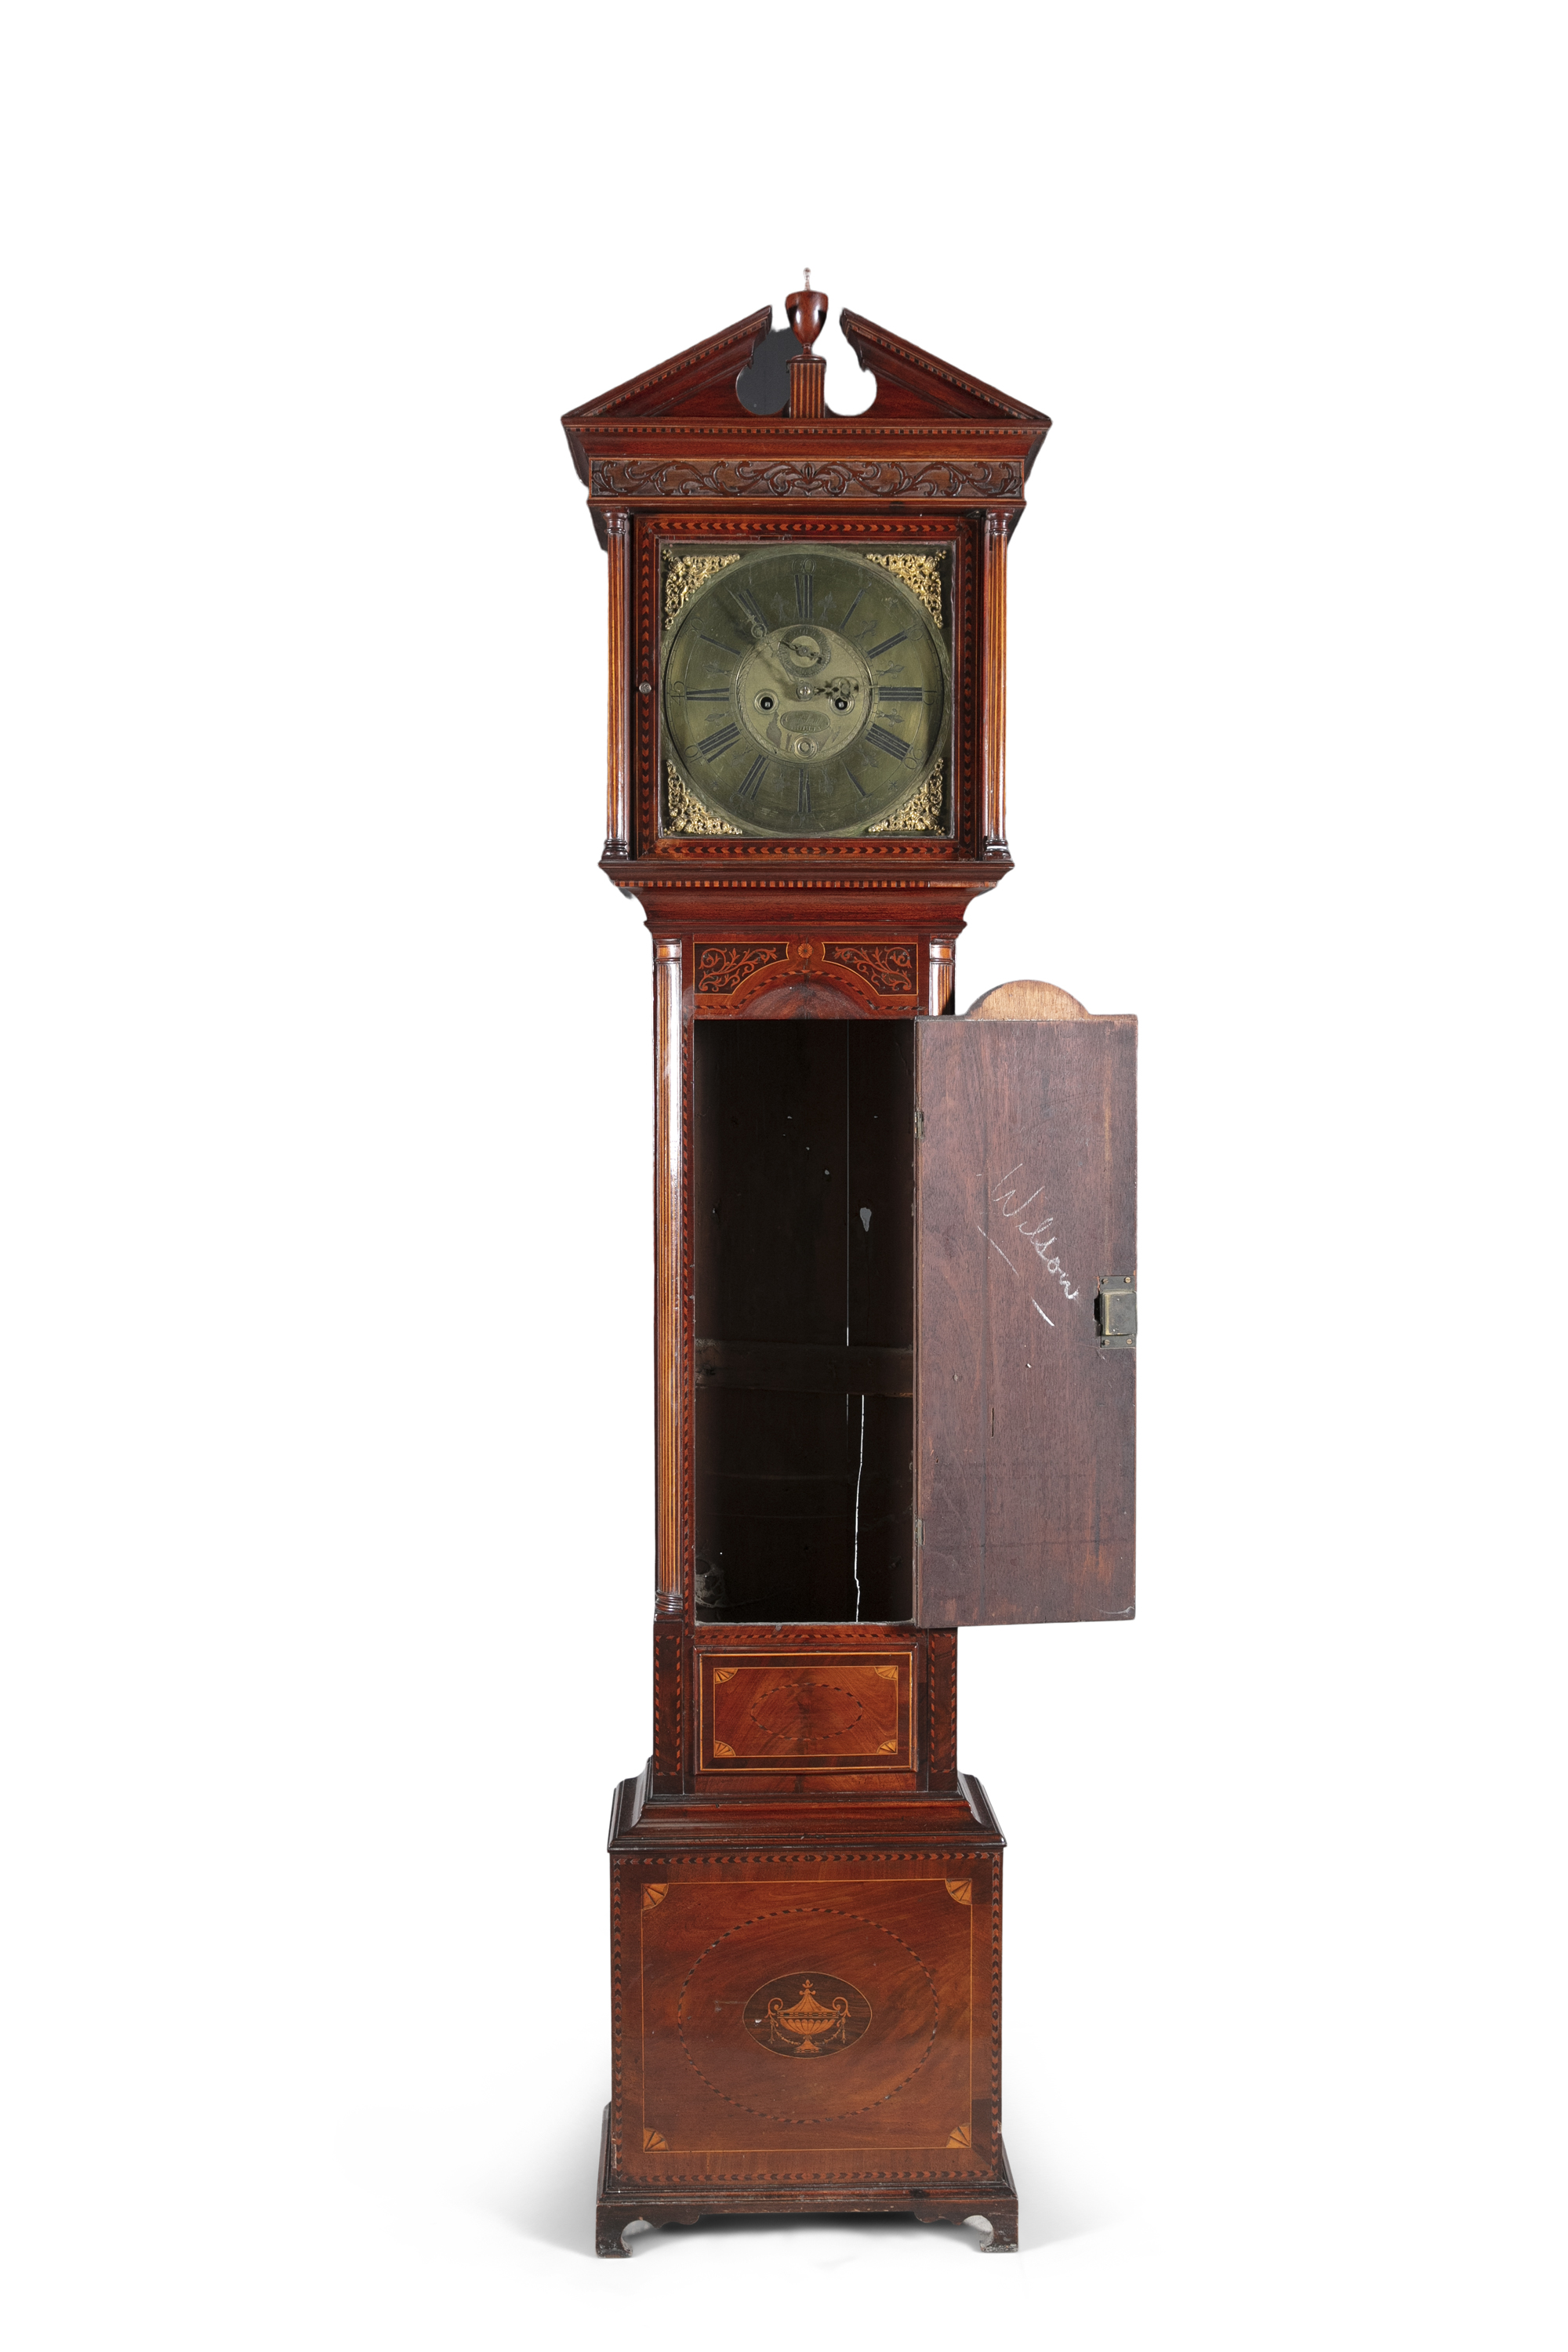 AN IRISH GEORGE III MAHOGANY AND MARQUETRY LONGCASE CLOCK, the brass dial with calendar aperture and - Image 2 of 2